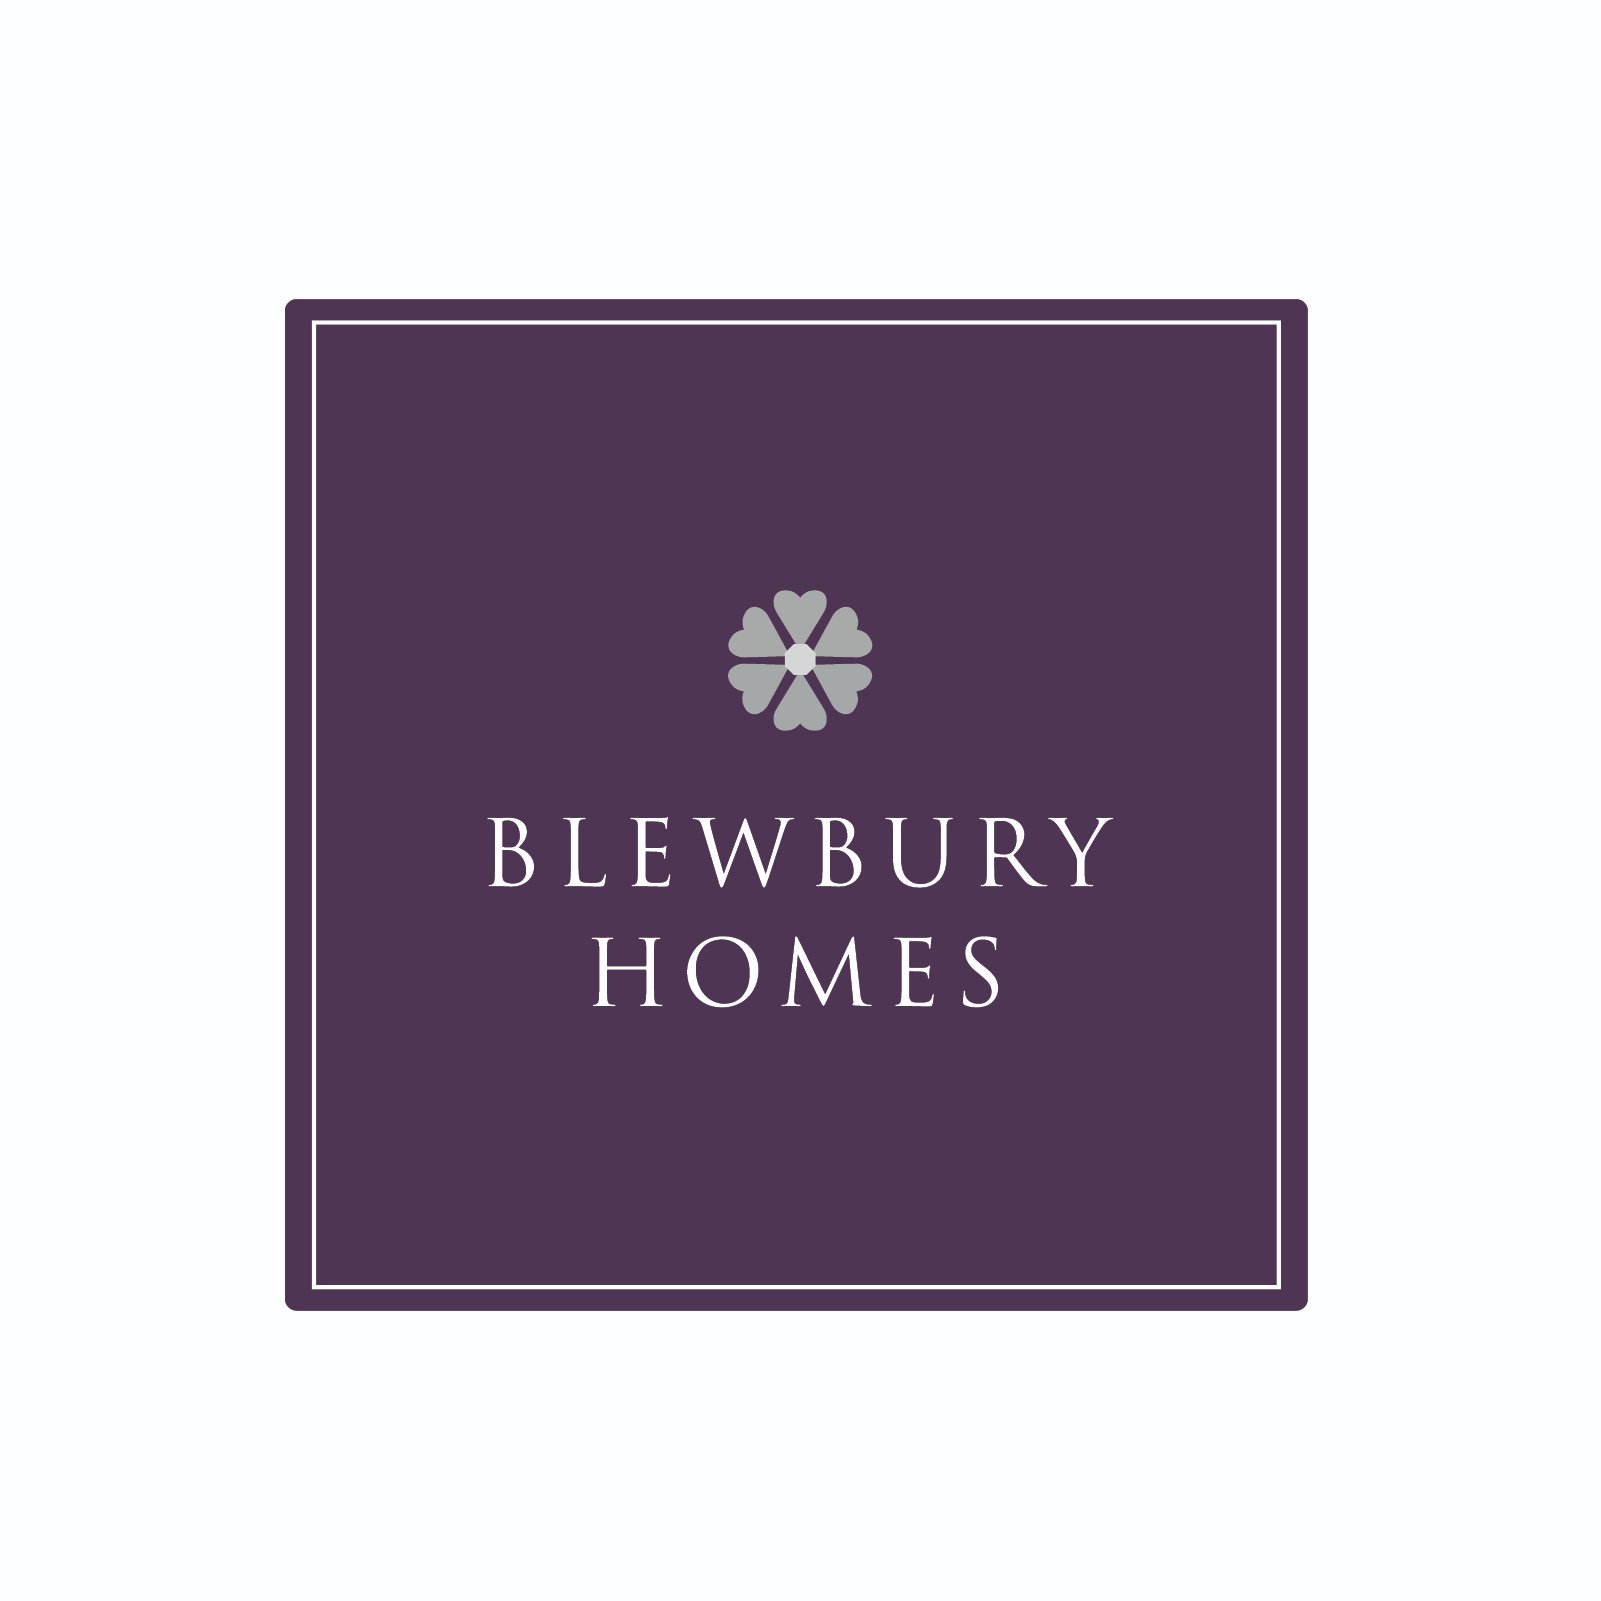 Building Excellence as Standard across England! 0330 058 6677 / hello@blewburyhomes.co.uk